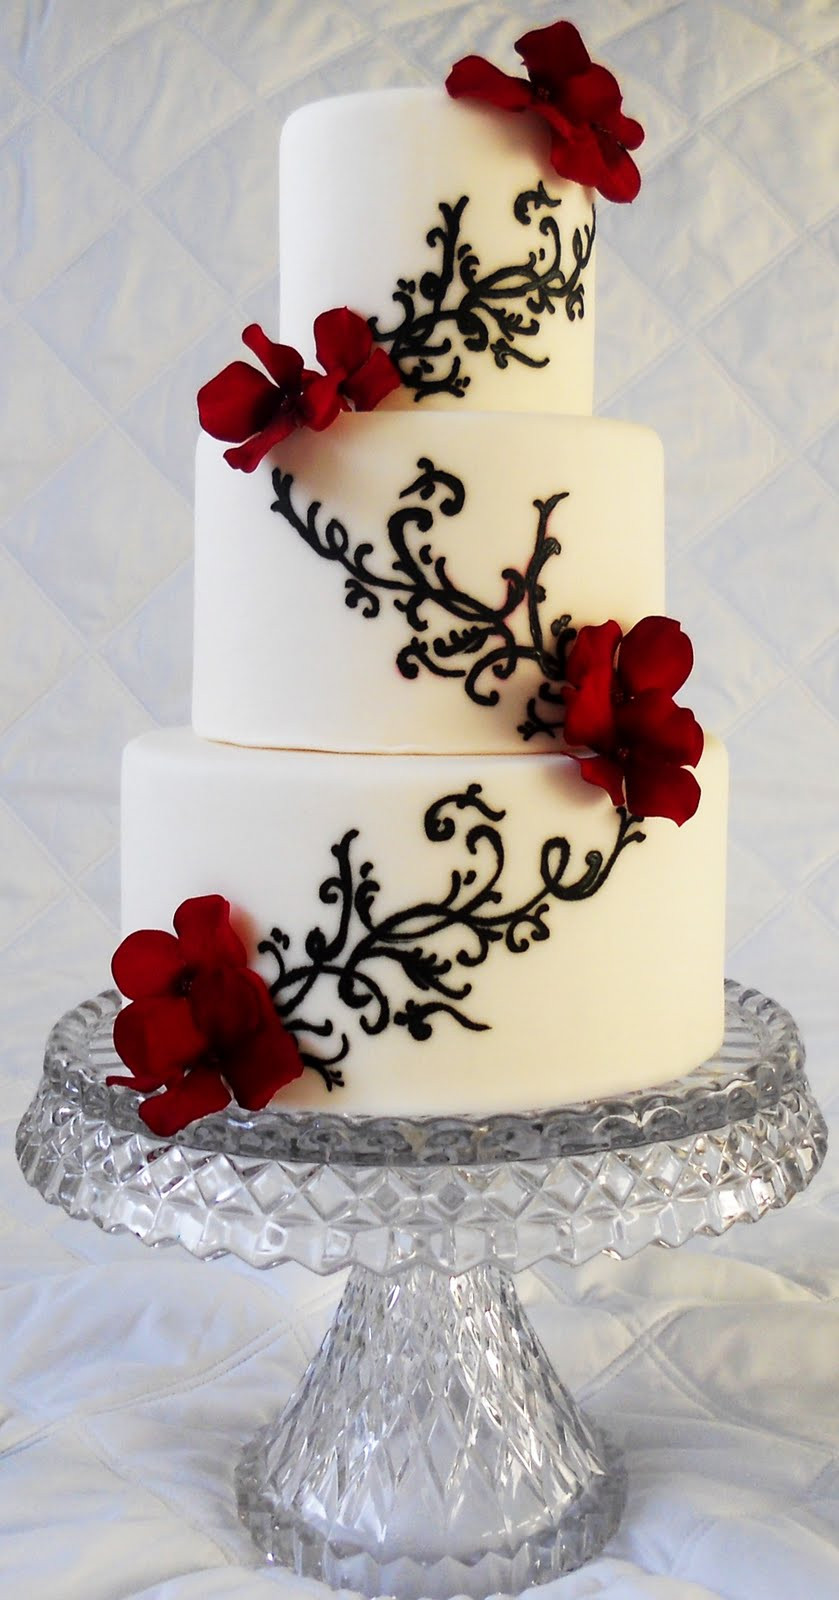 Red Black And White Wedding Cakes
 Memorable Wedding Find the Best Red Black and White